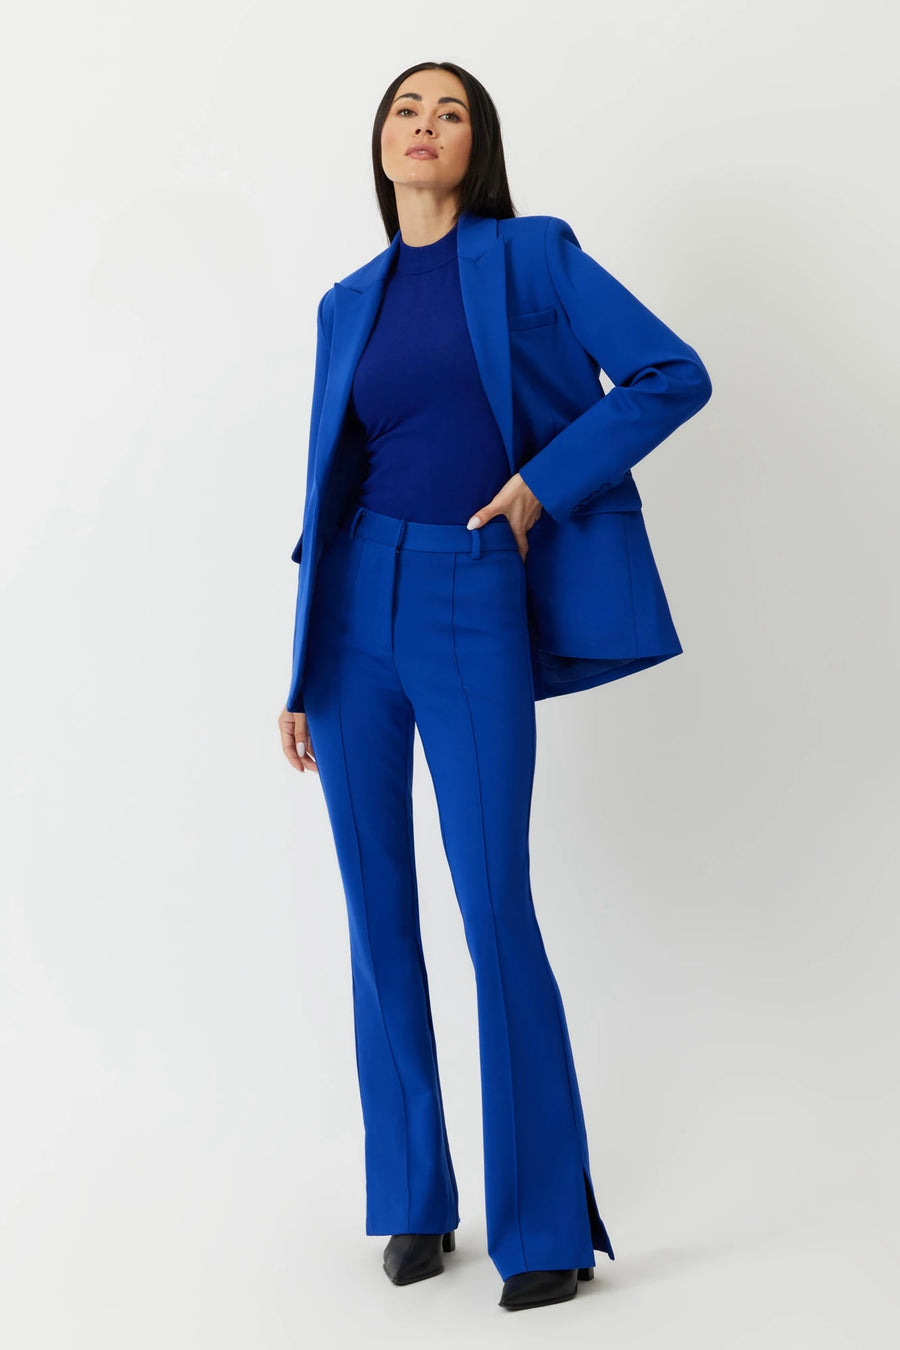 The Prato High Rise flare leg ponte trouser in lapis blue by Greyven.